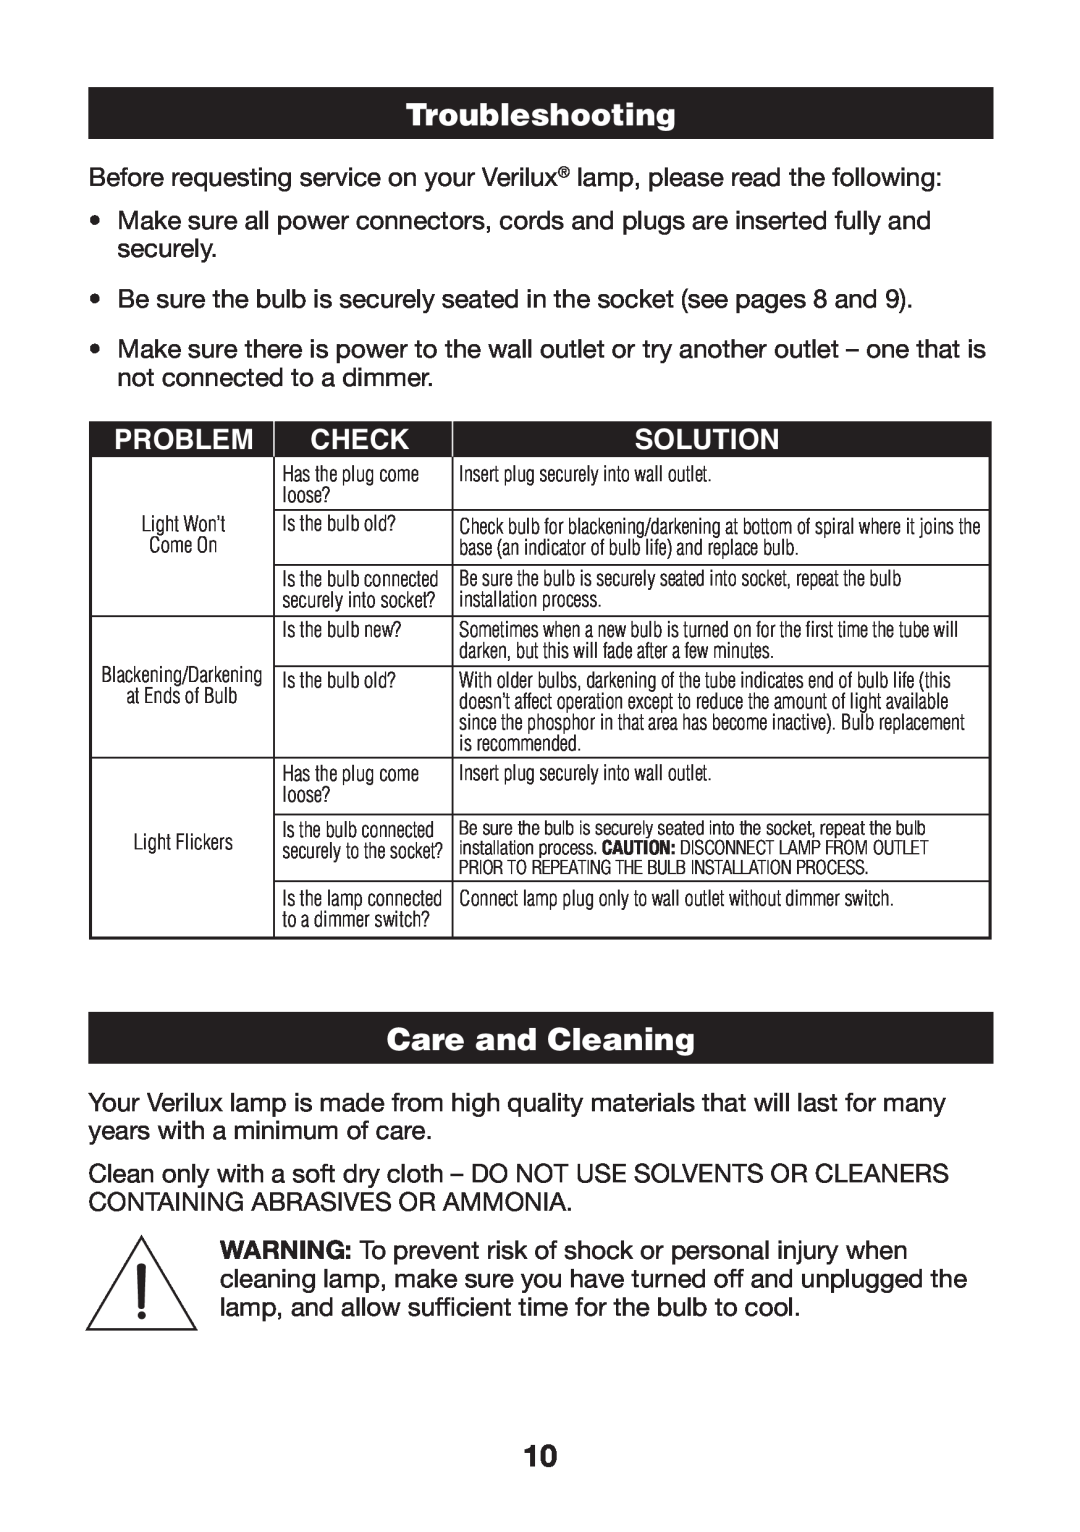 Verilux 571391 manual Troubleshooting, Care and Cleaning, Problem, Check, Solution 